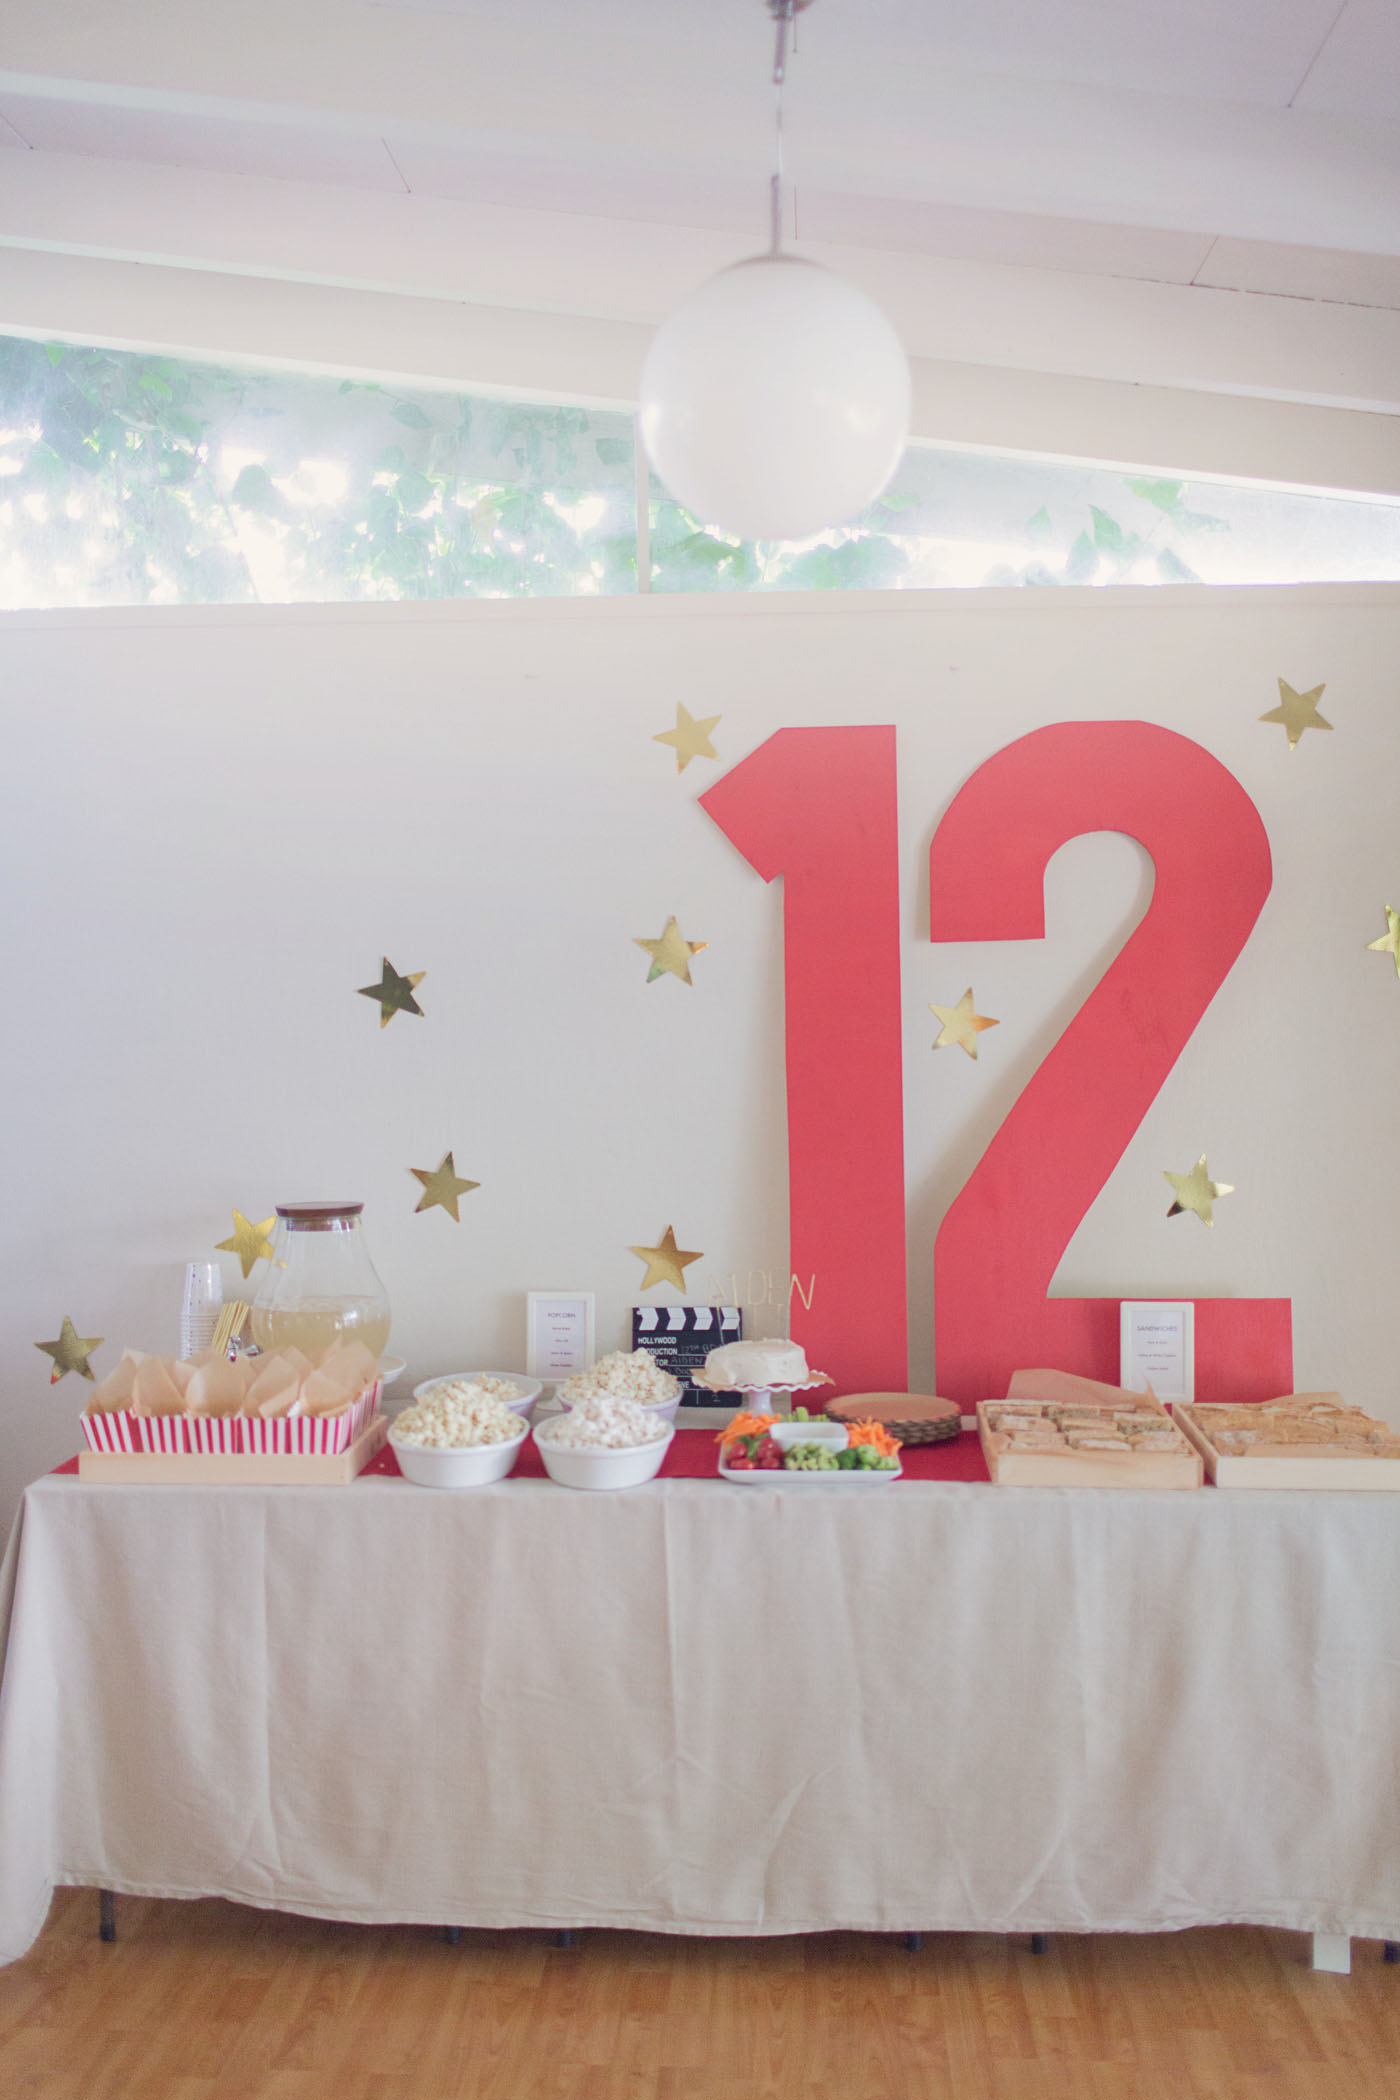 A Movie inspired pre-teen birthday party